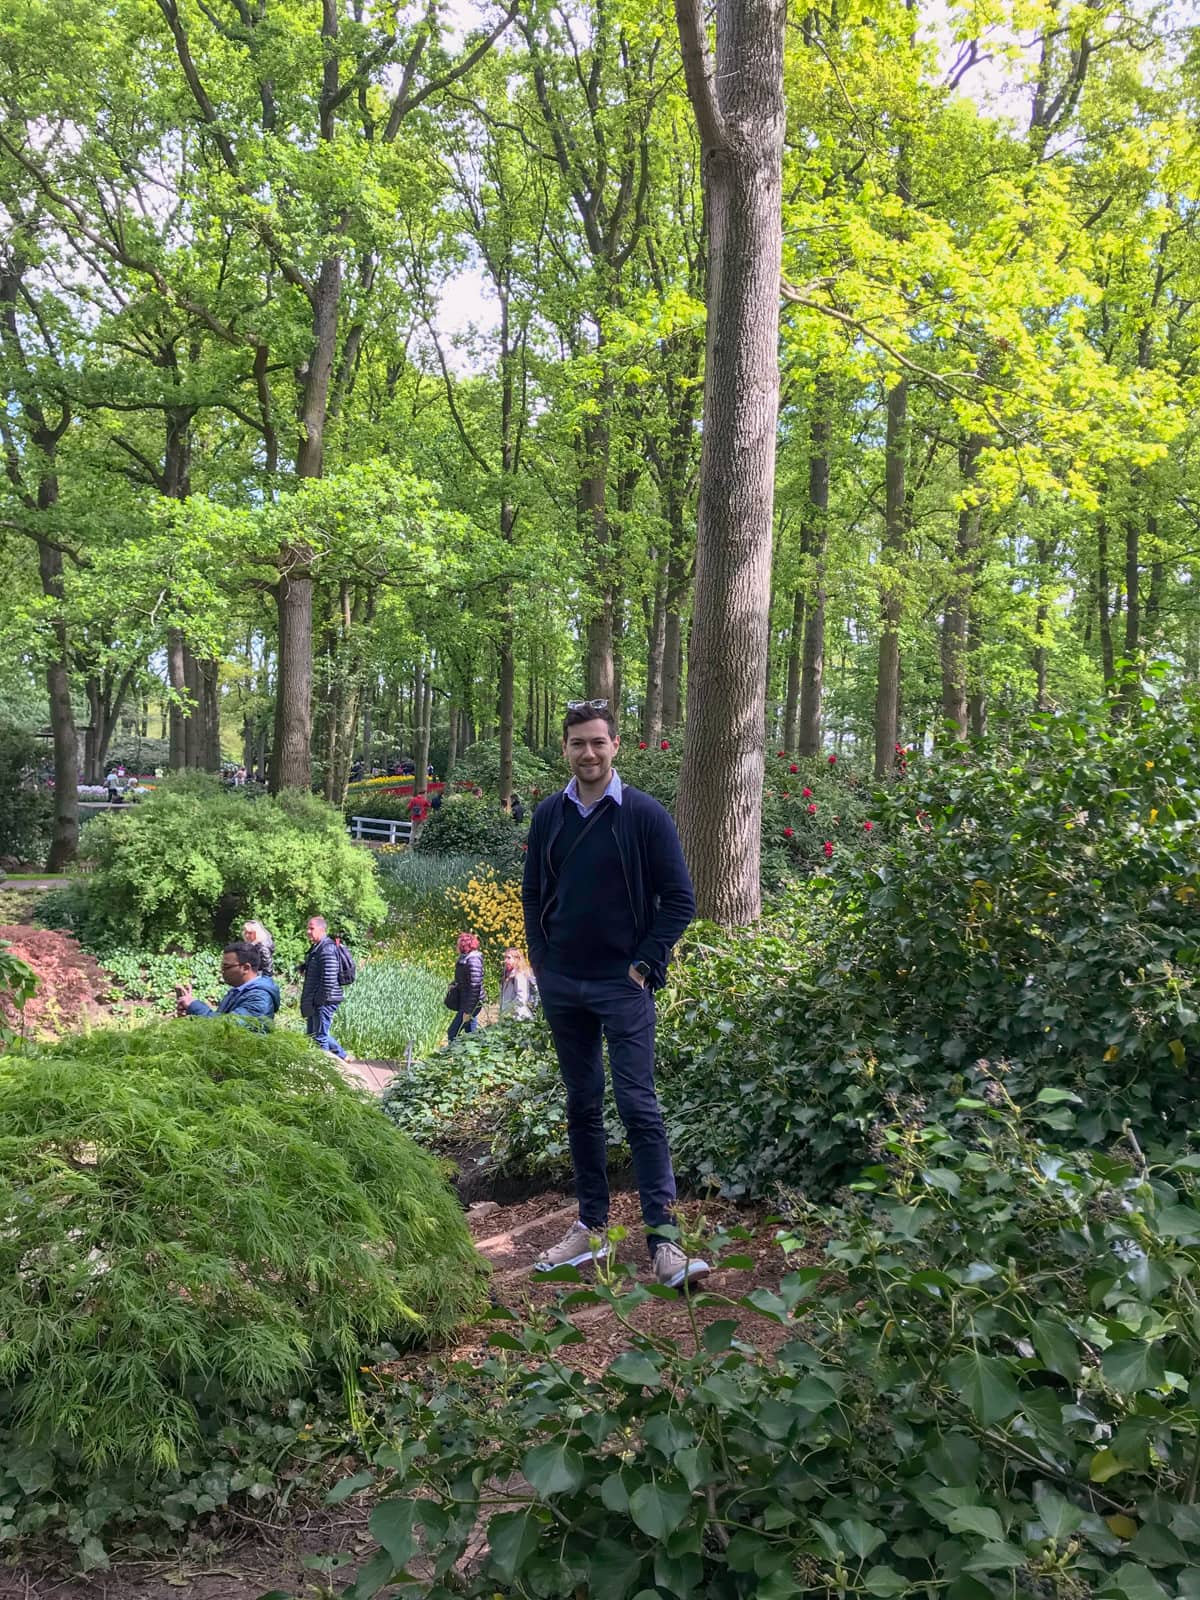 A man dressed in dark blue with his hands in his pockets, standing in a garden with a makeshift dirt path. There are many trees with tall trunks in the garden.